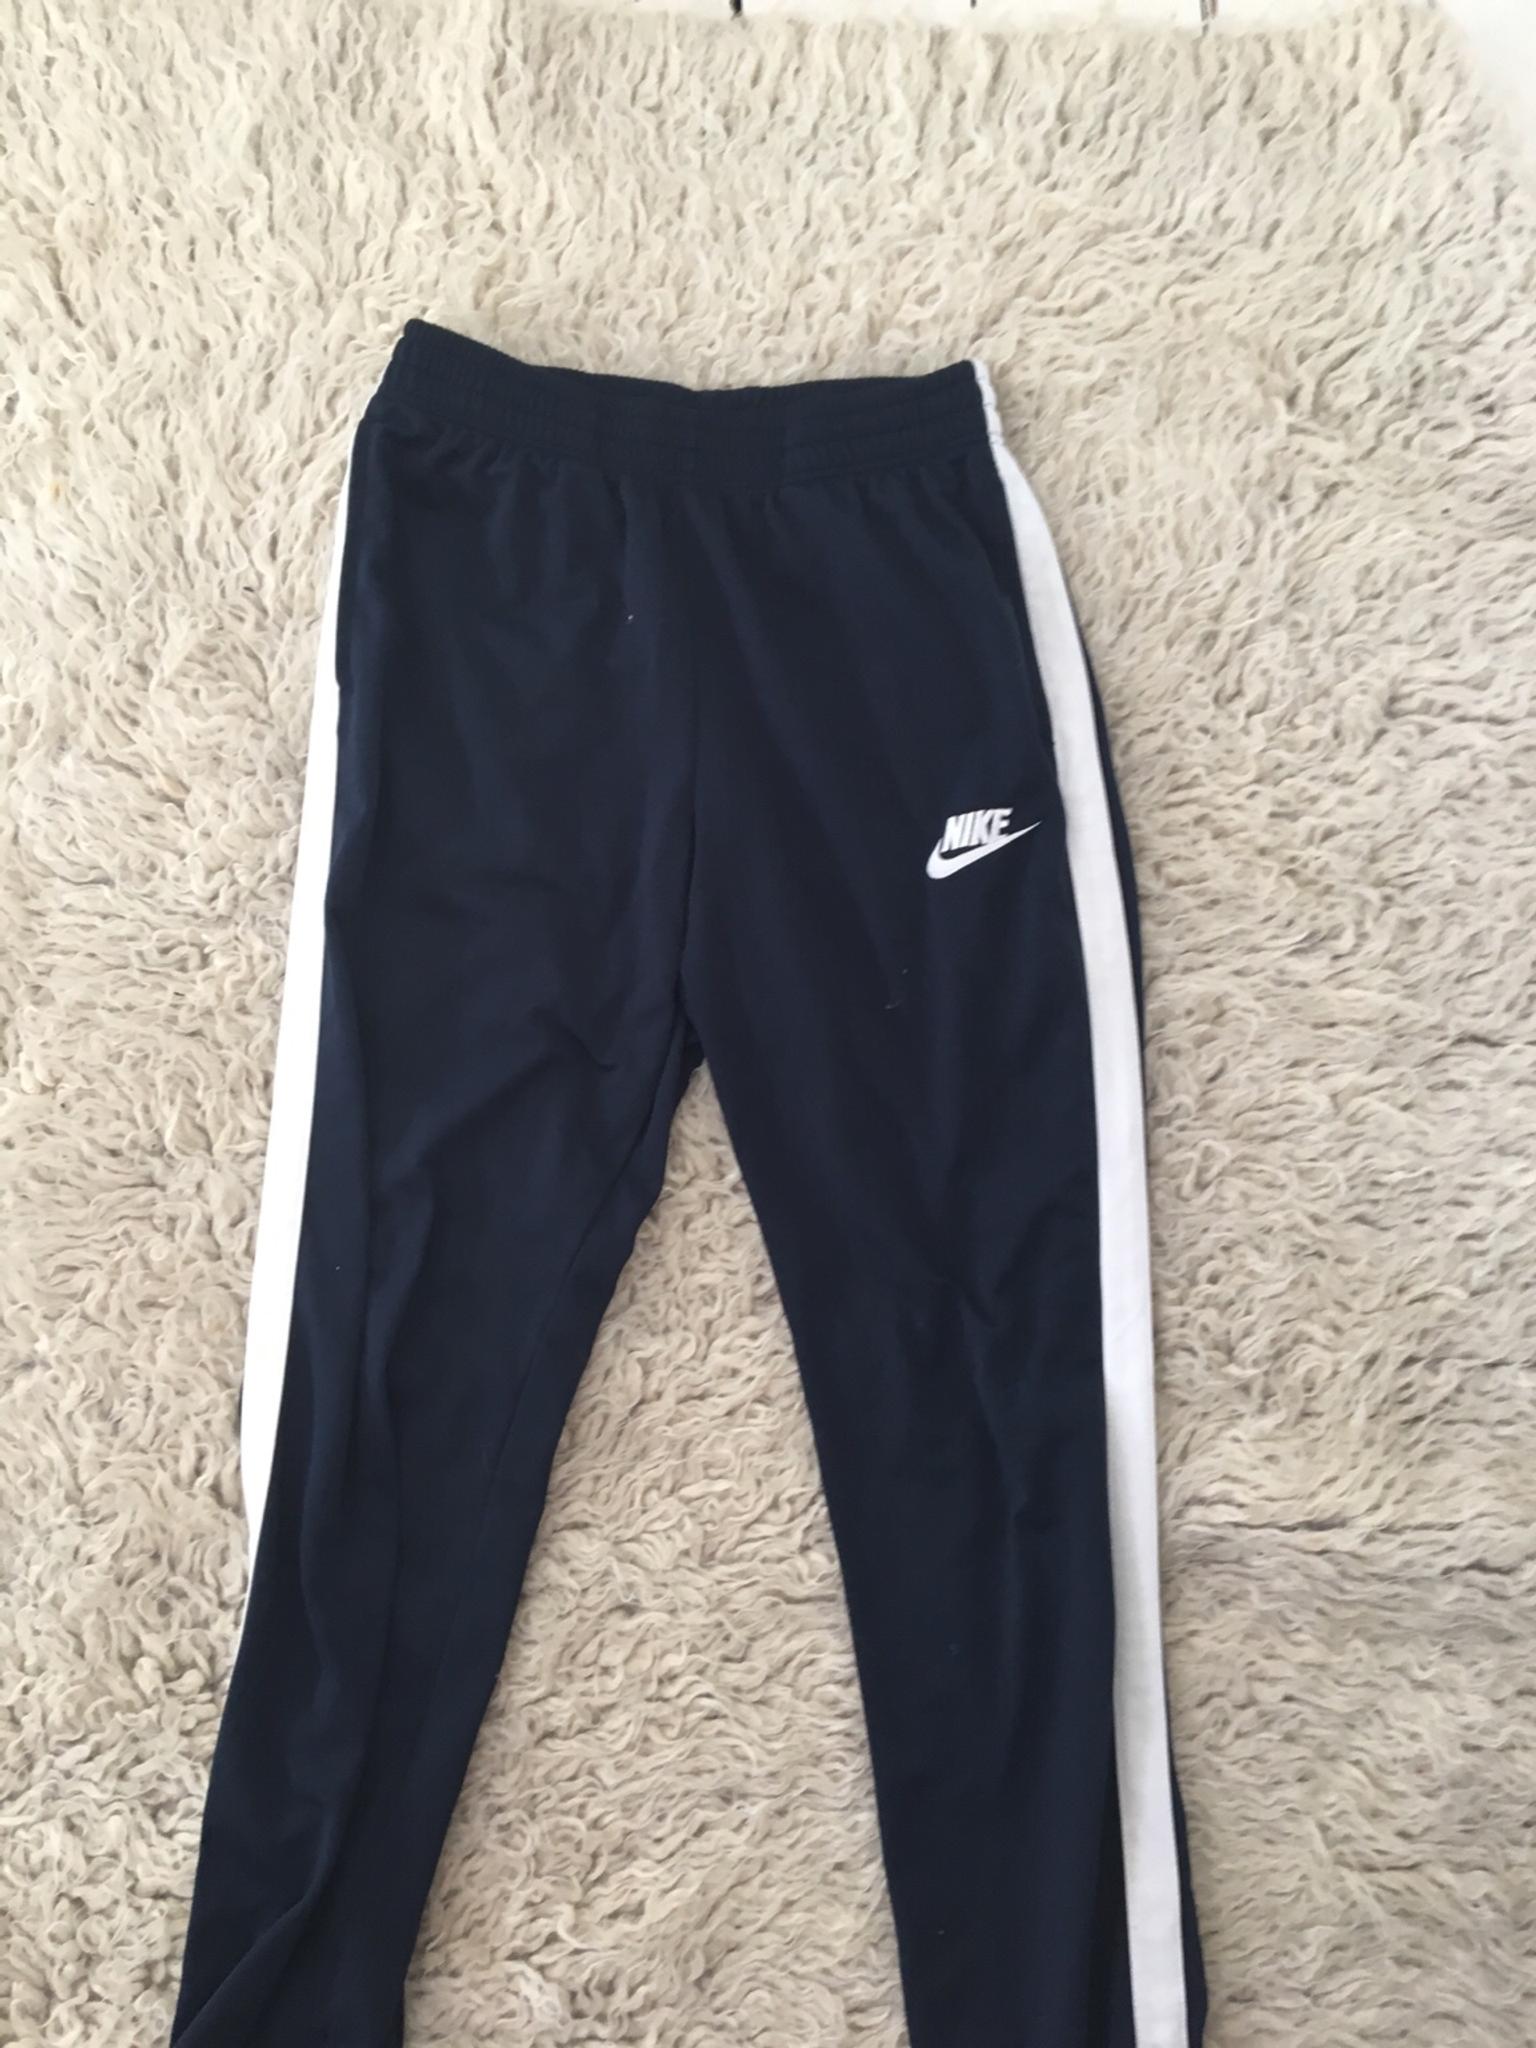 black tracksuit bottoms with white stripe